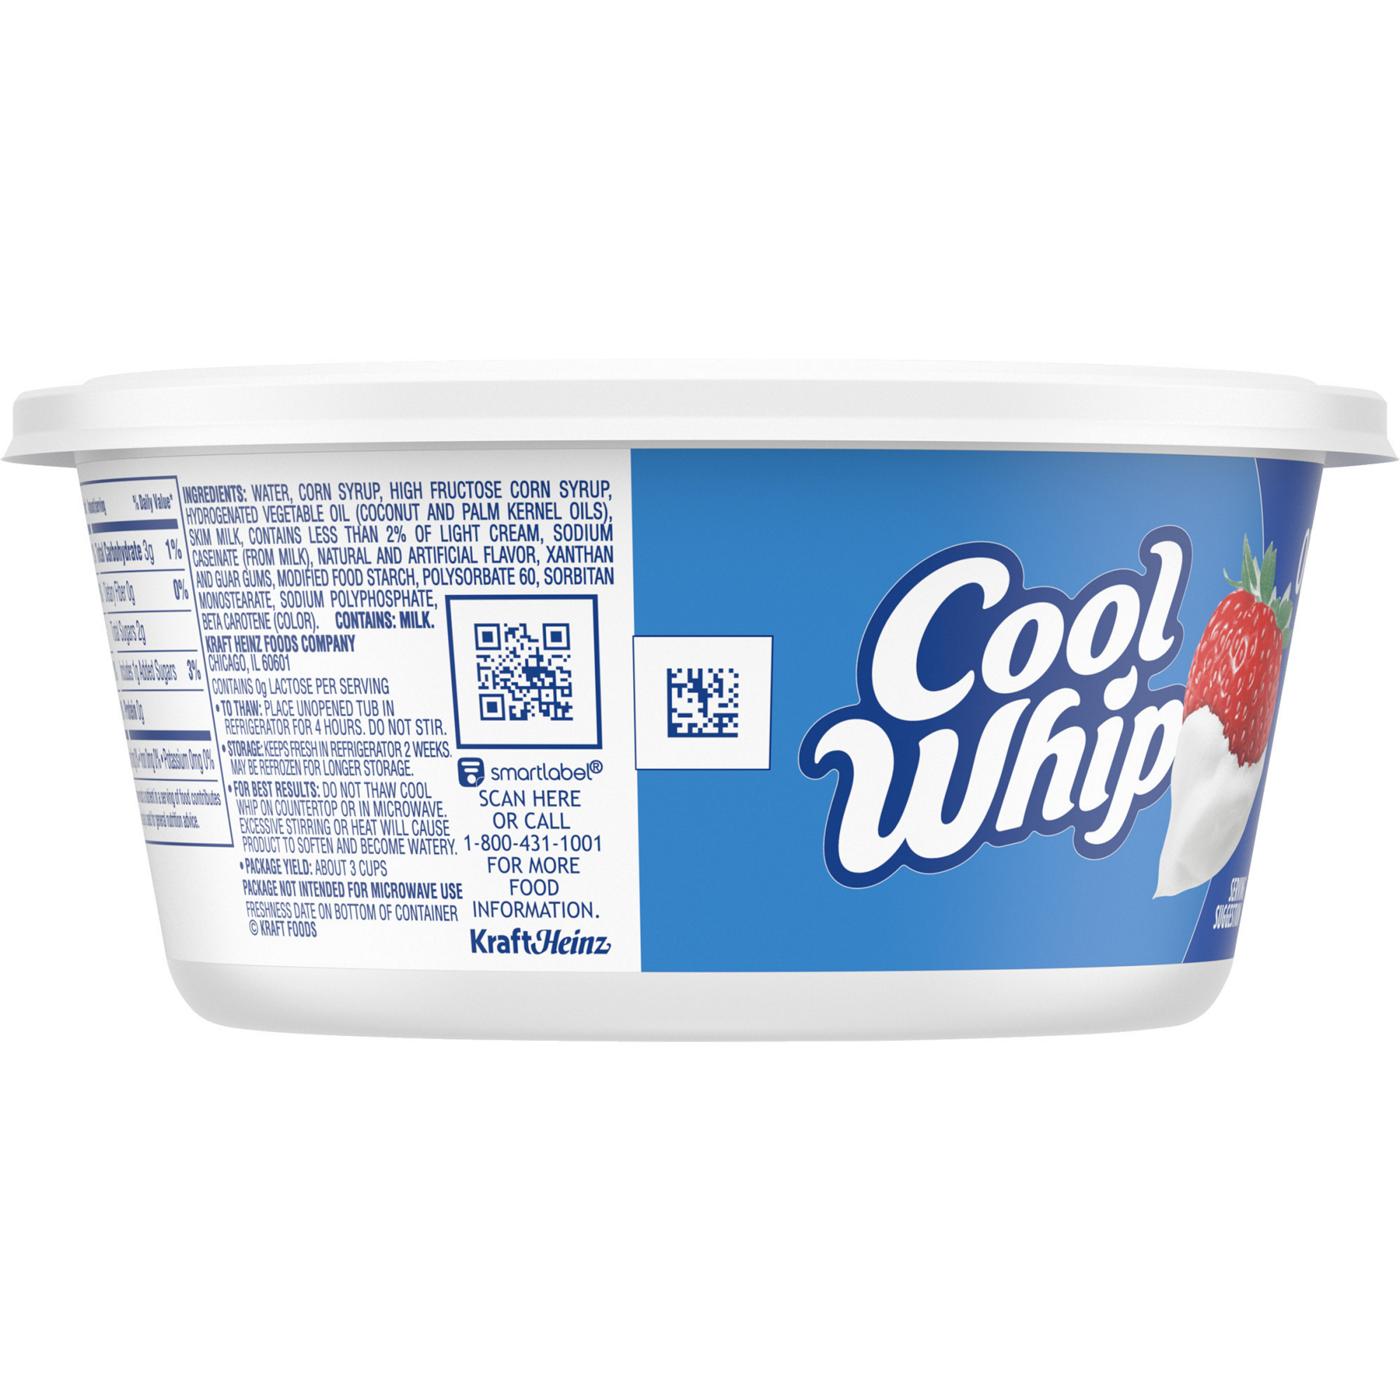 Kraft Cool Whip Original Whipped Topping; image 4 of 7